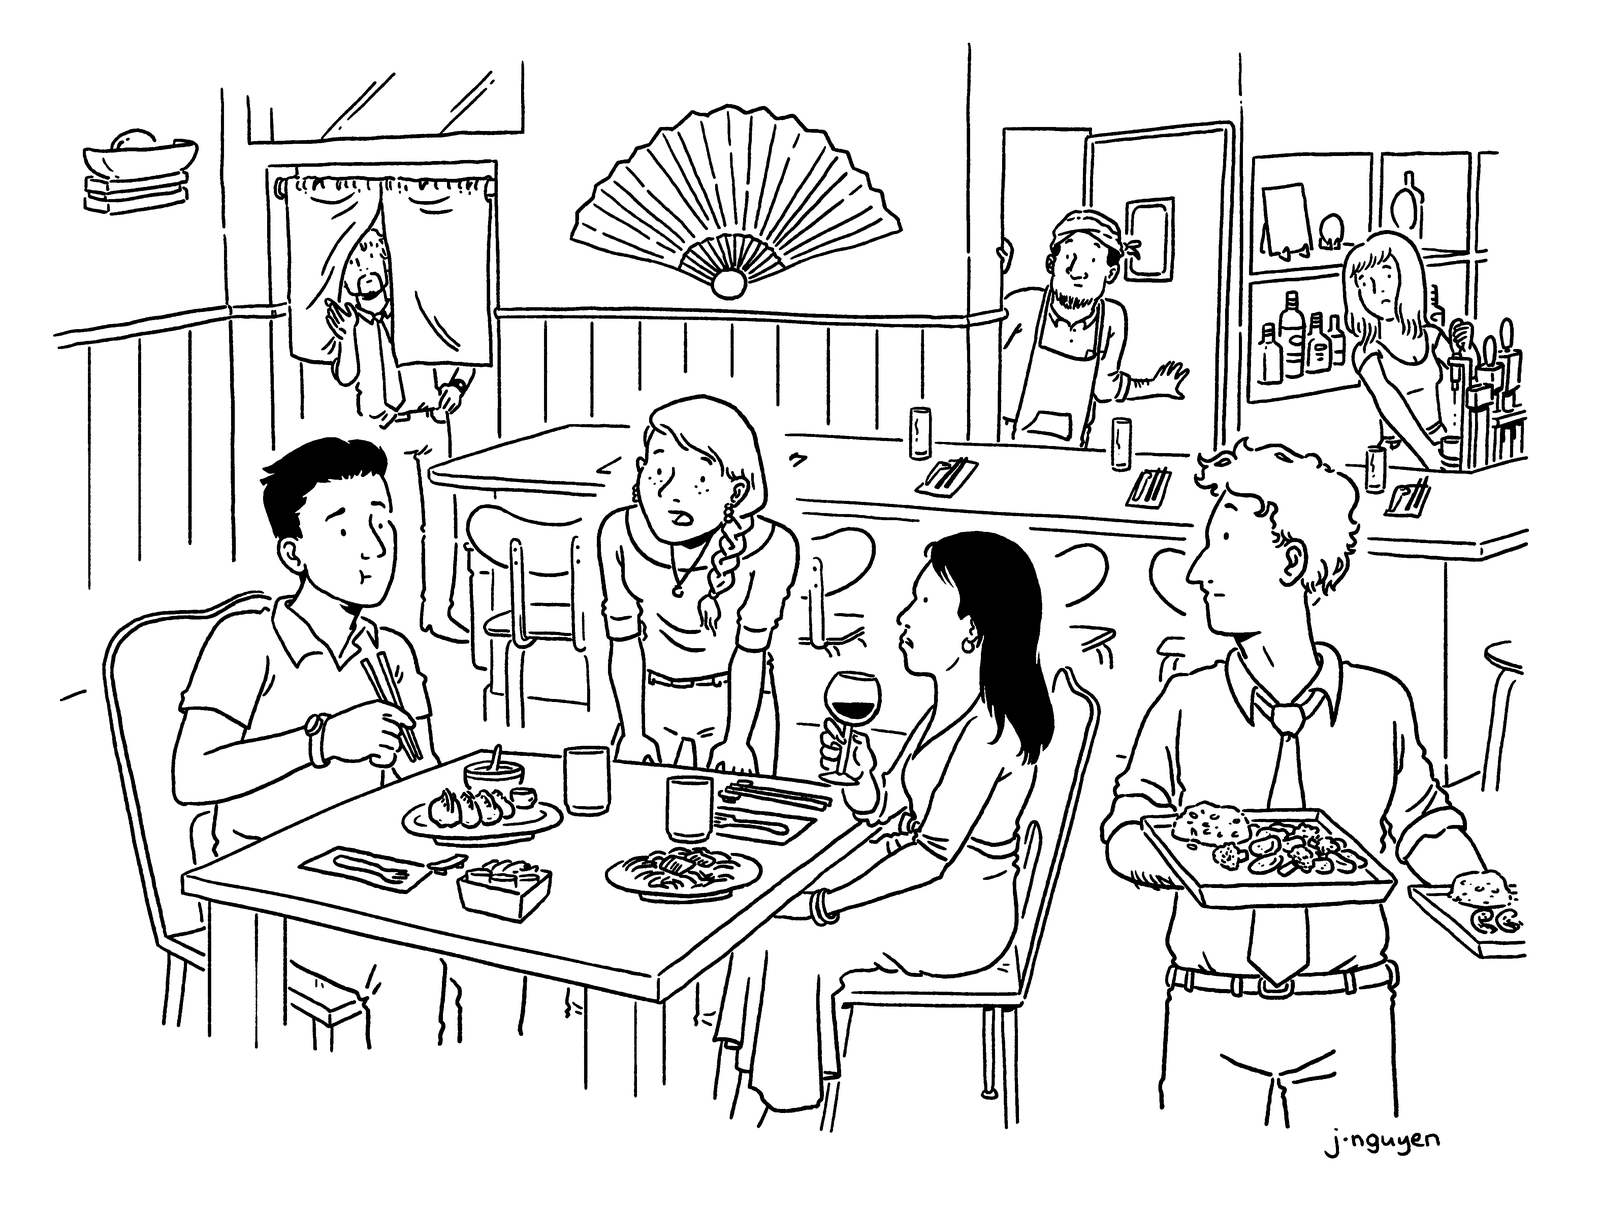 A waiter talks to two people eating at a restaurant.